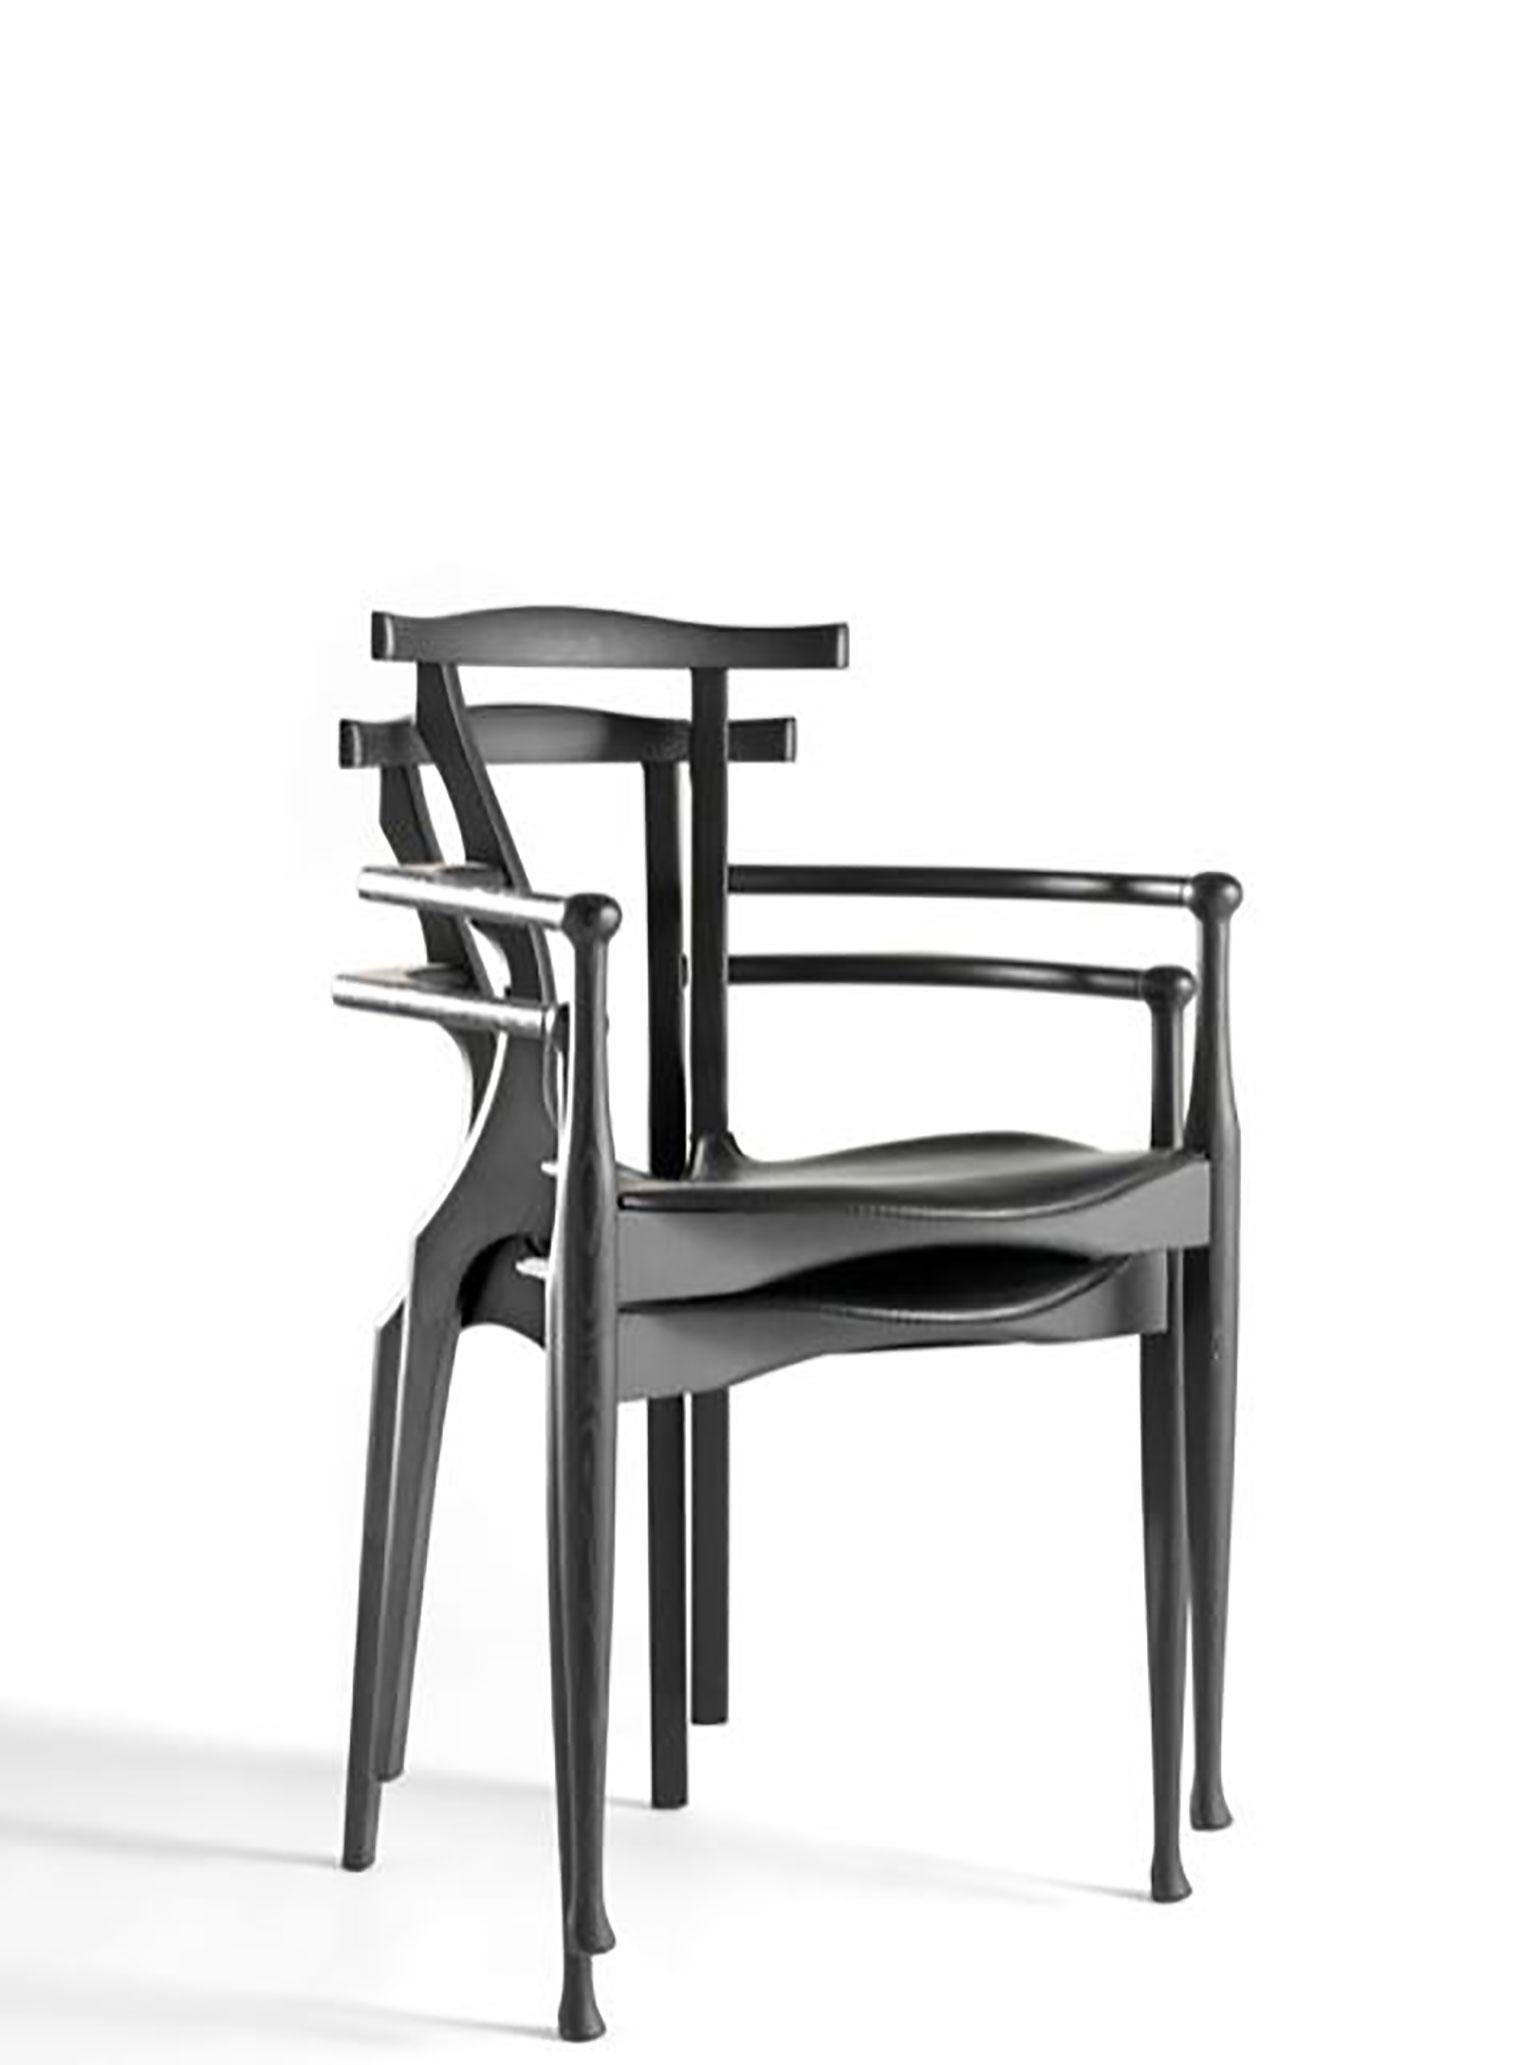 Gaulino chair designed by Oscar Tusquets Blanca for BD Barcelona. This is one of the great designs by Oscar Tusquets. The chair is manufactured from wood and leather and has transformed into a figure in Spanish design. Its name comes from the